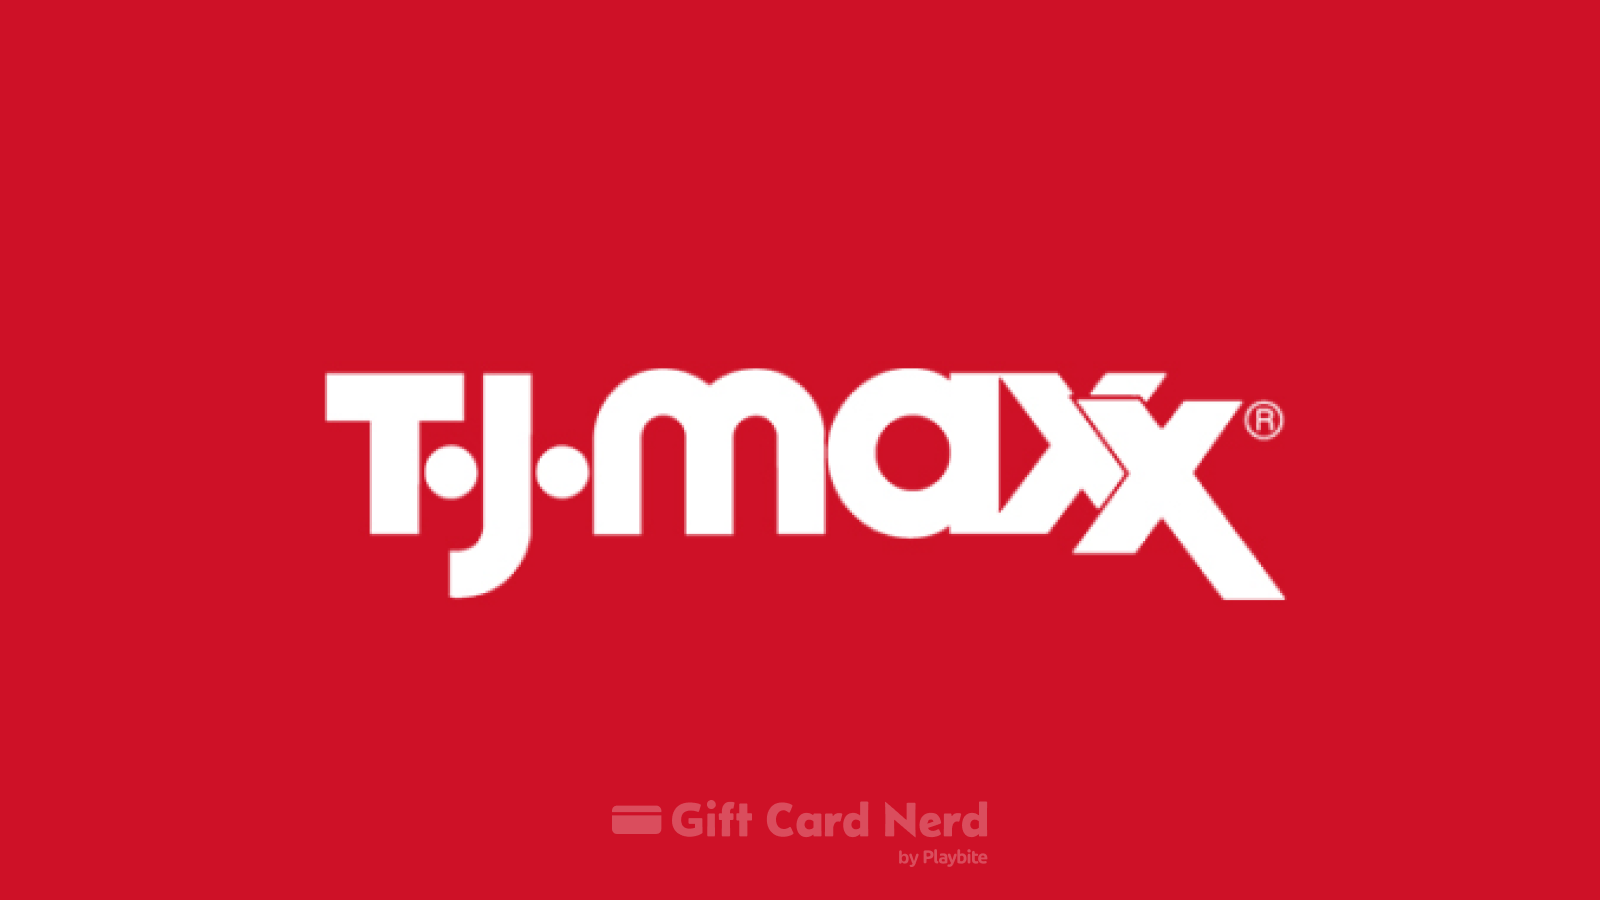 Does GameStop Sell T.J. Maxx Gift Cards?